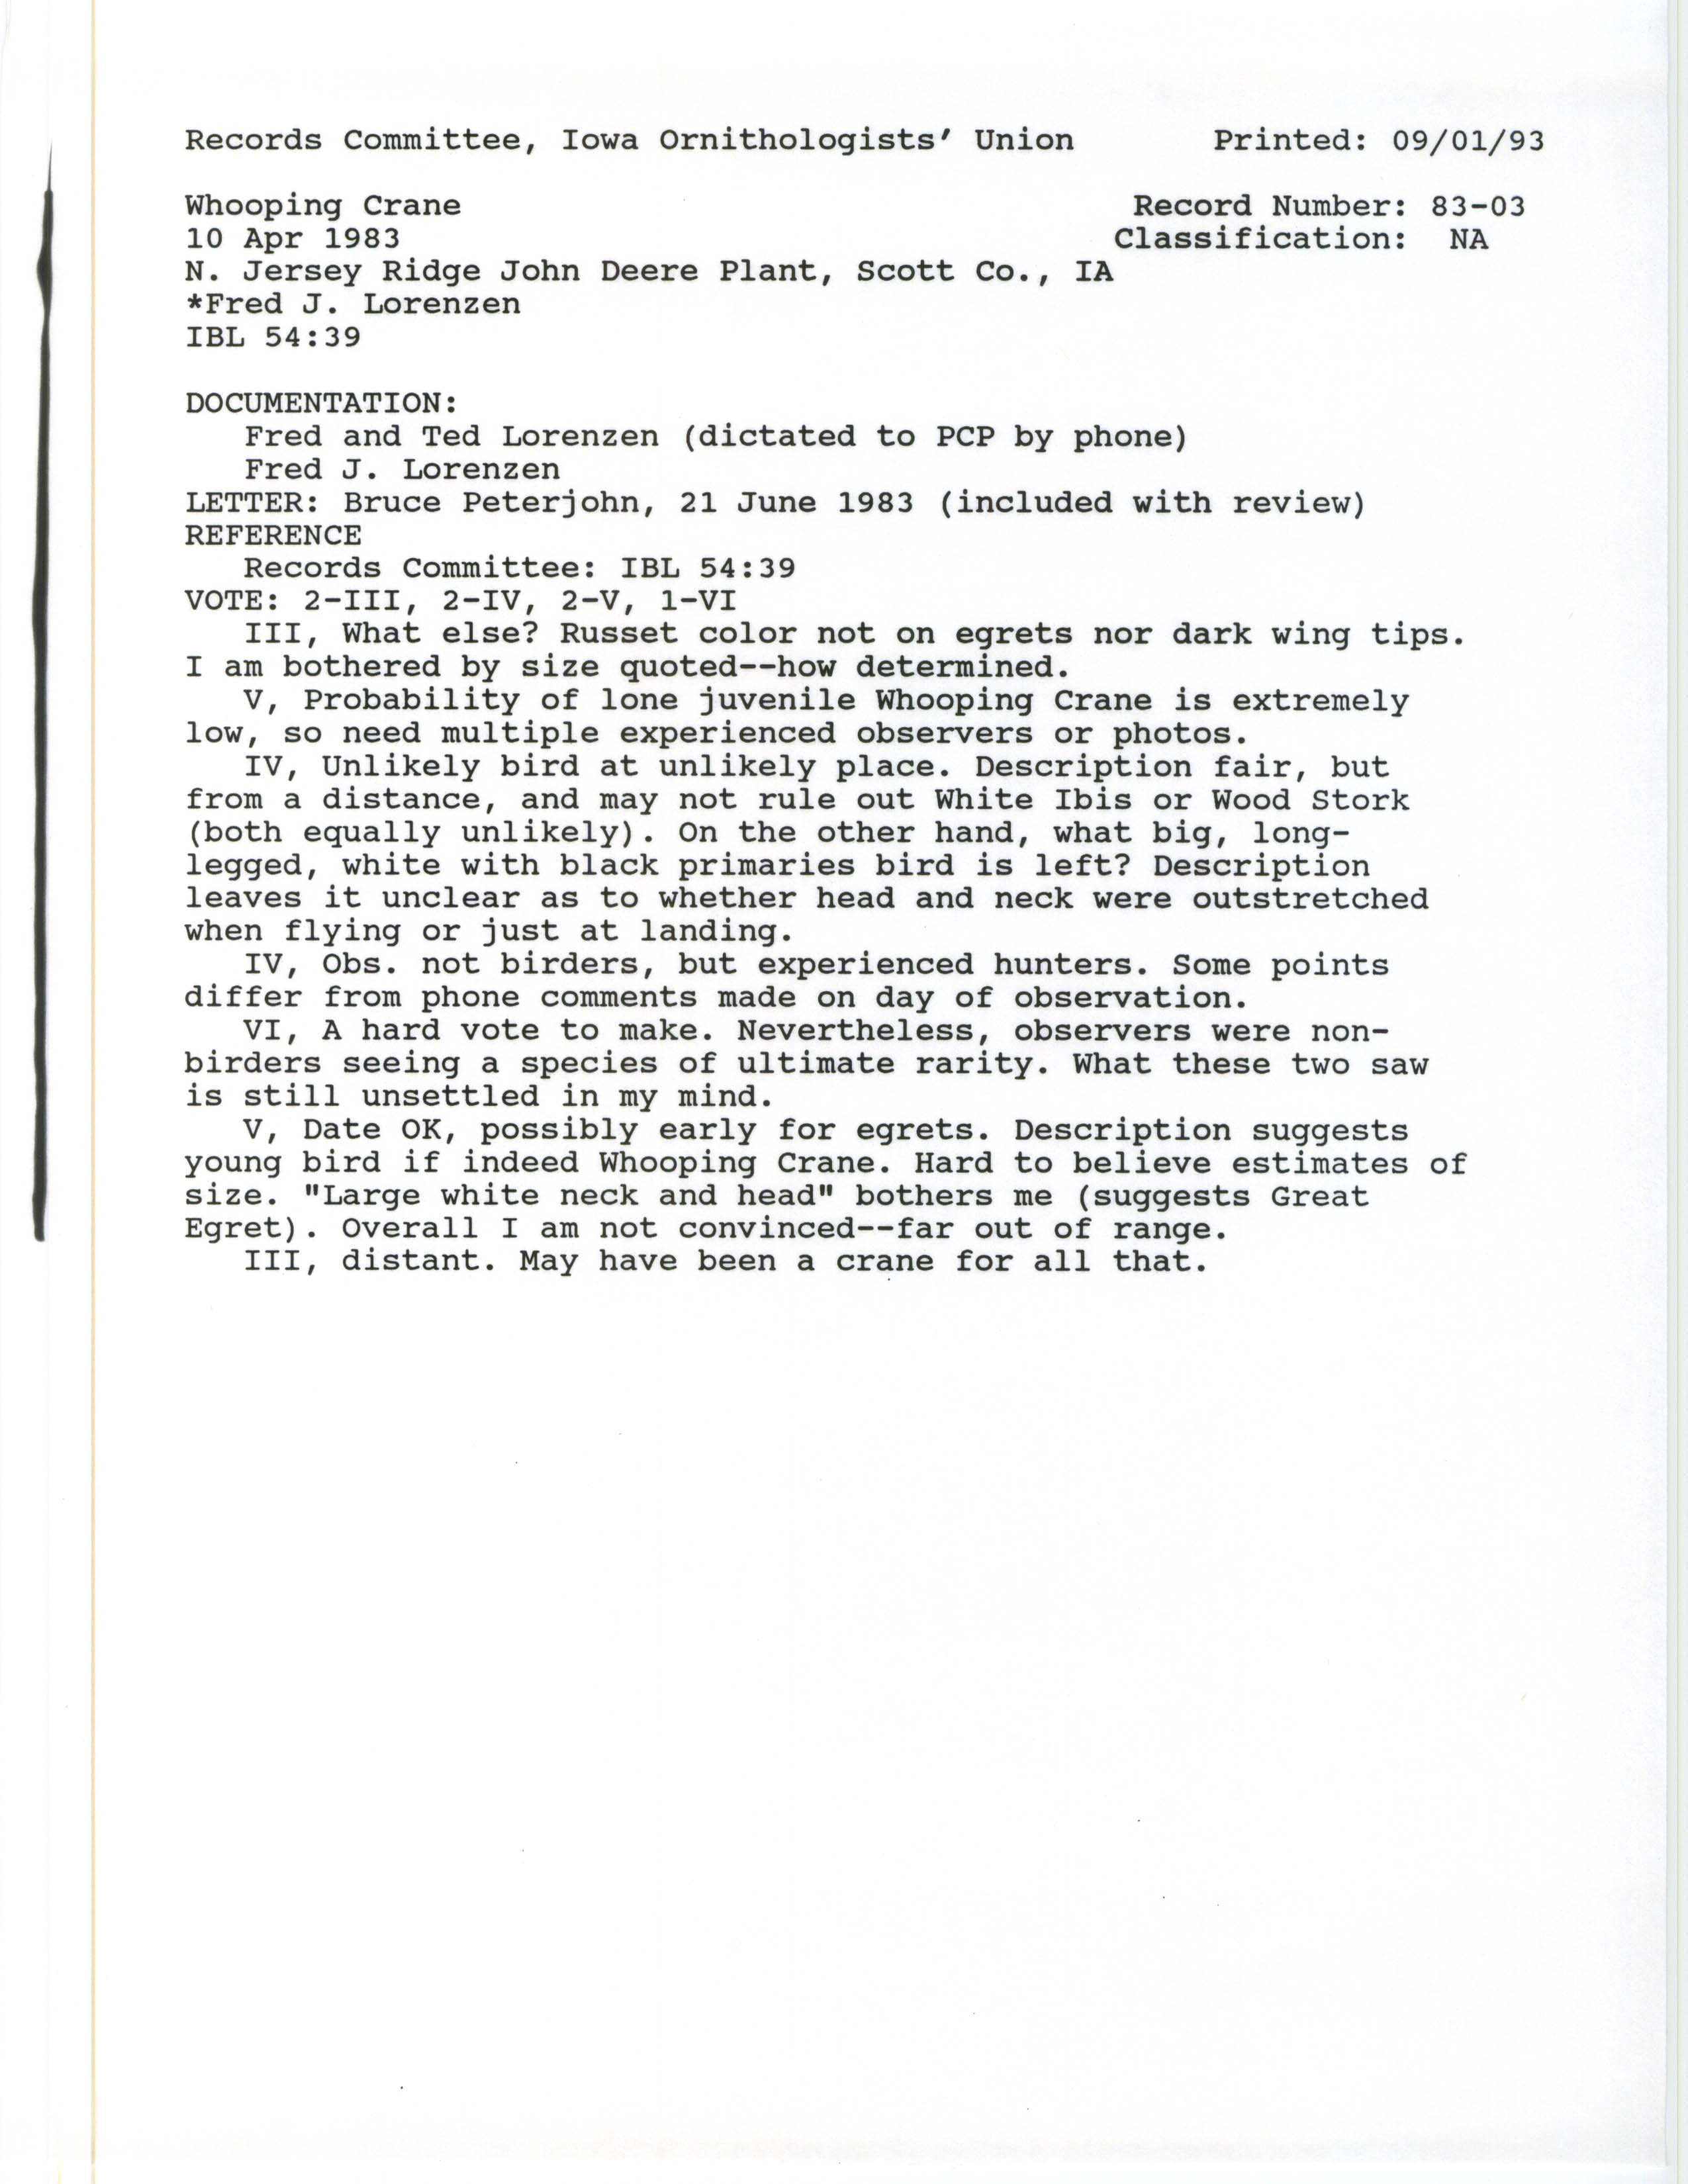 Records Committee review for rare bird sighting of Whooping Crane east of Davenport, 1983